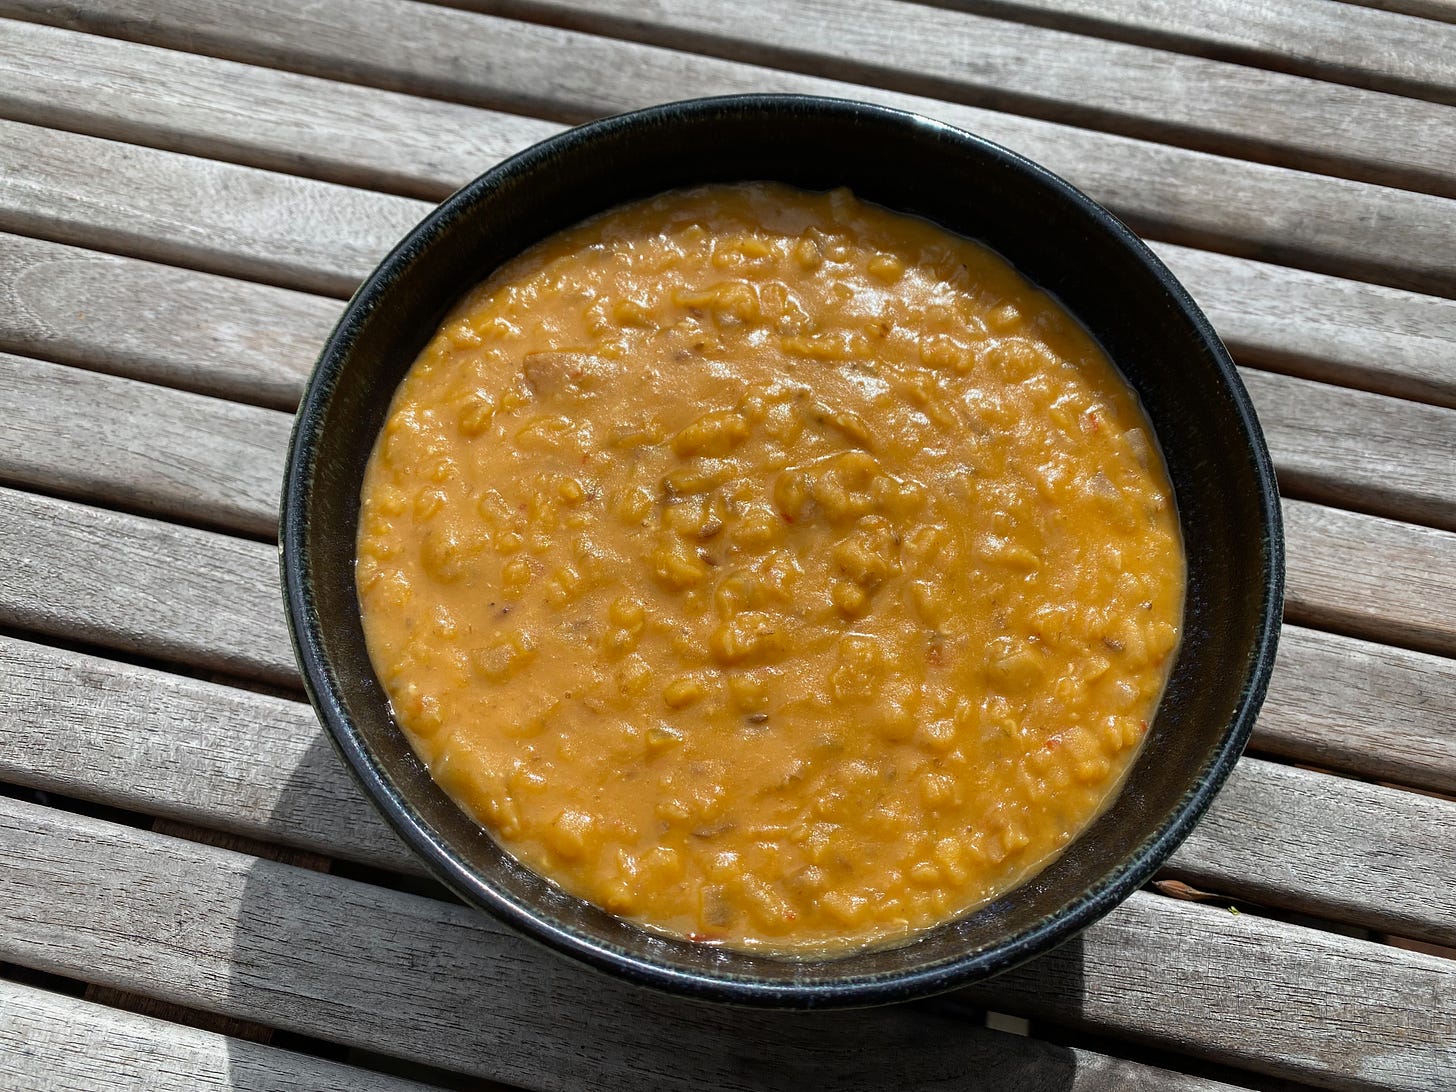 A ceramic bowl of red lentil soup on slated wooden table.